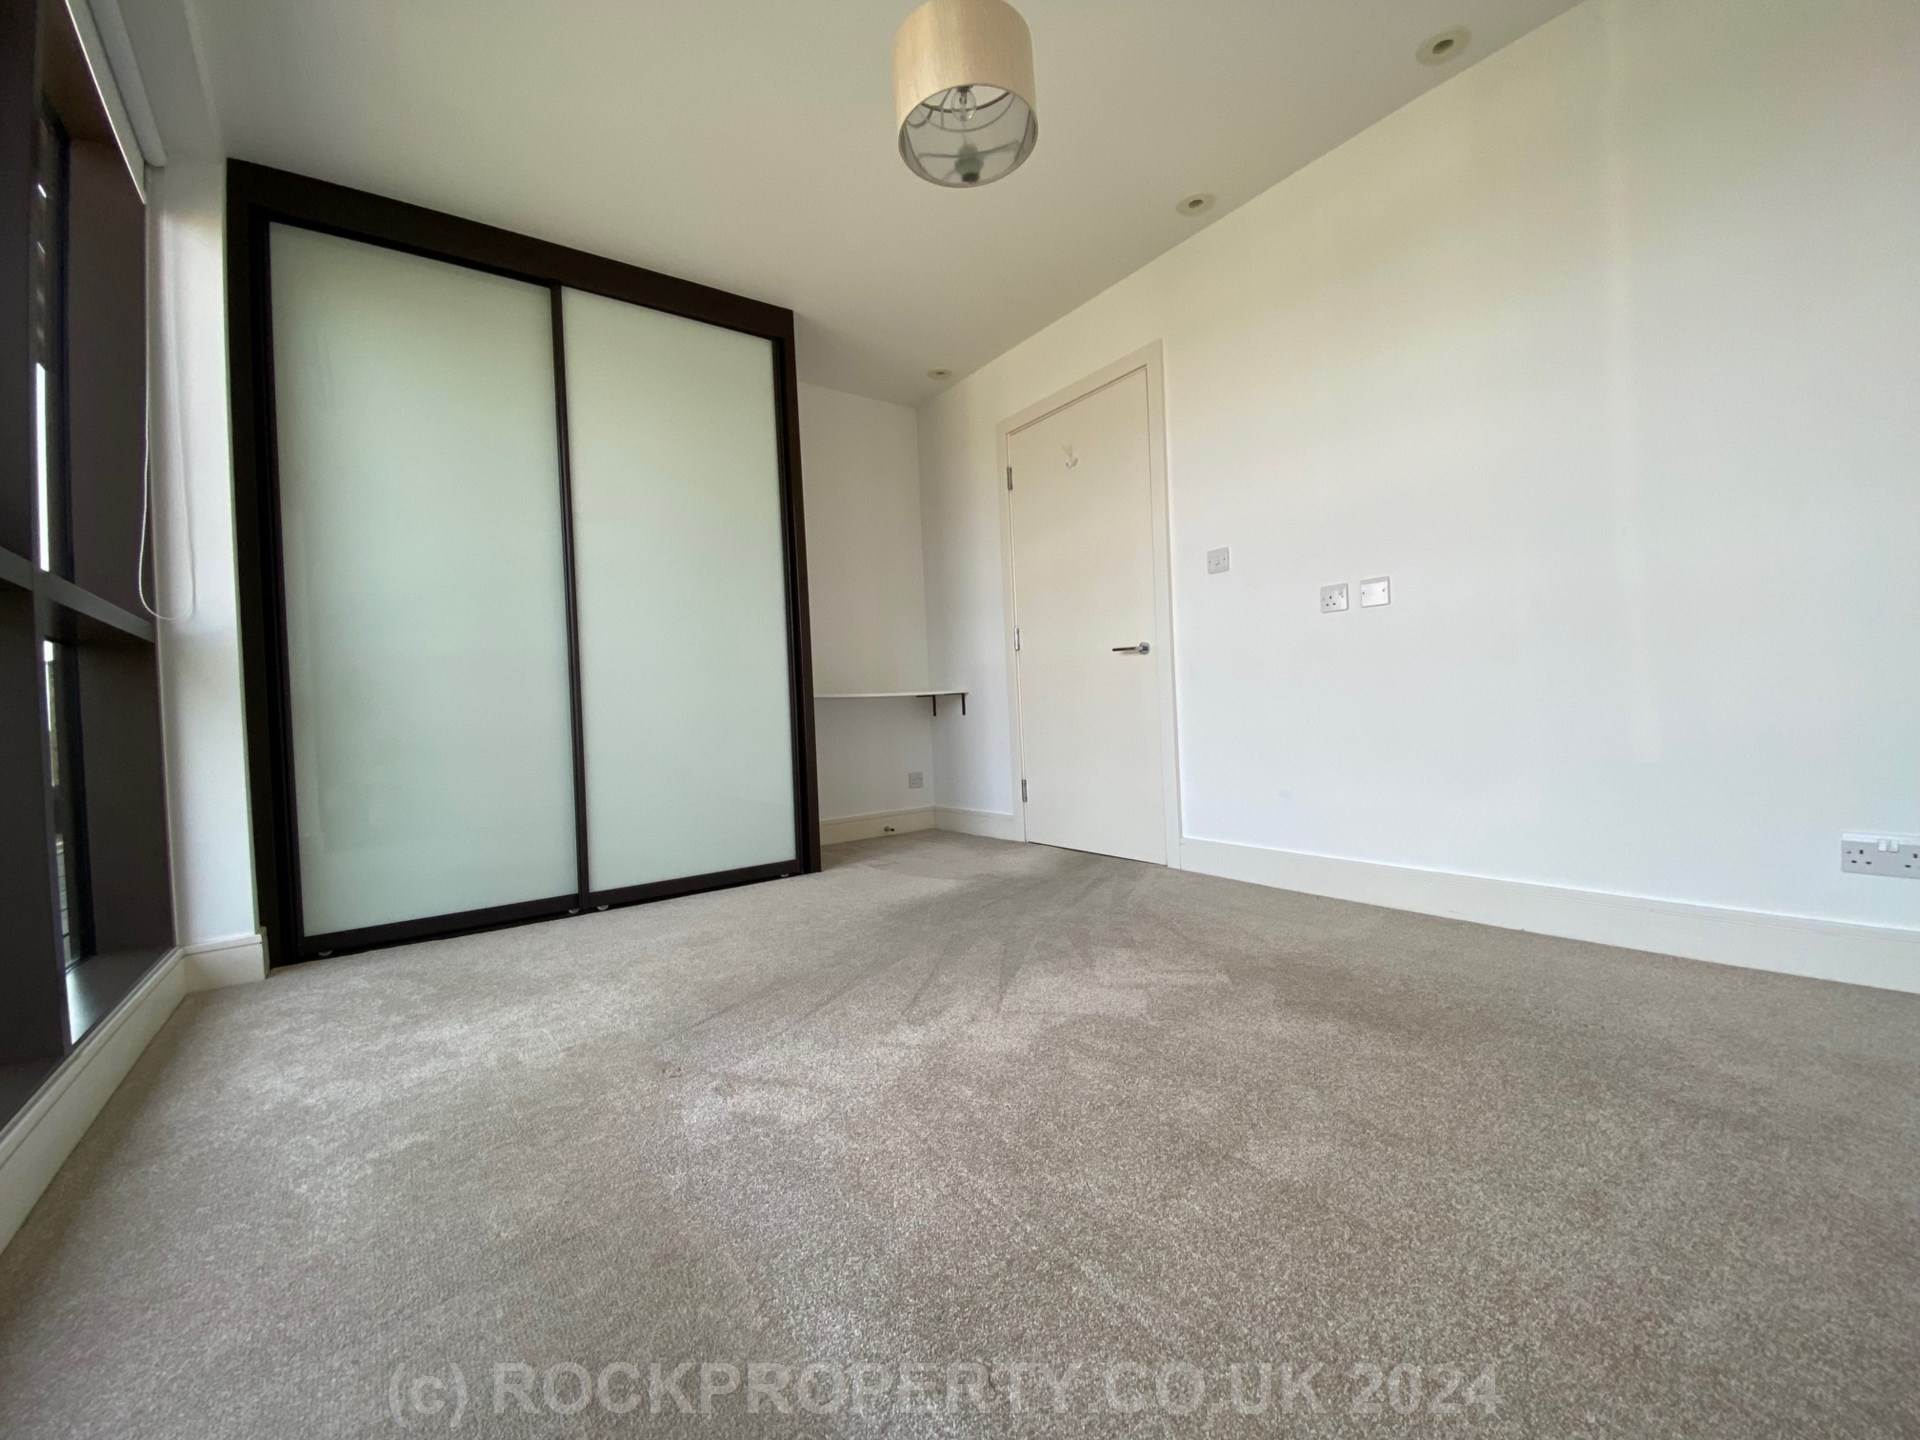 STUNNING 1 BED PENTHOUSE APARTMENT, Le Capelain House, St Helier, Image 11